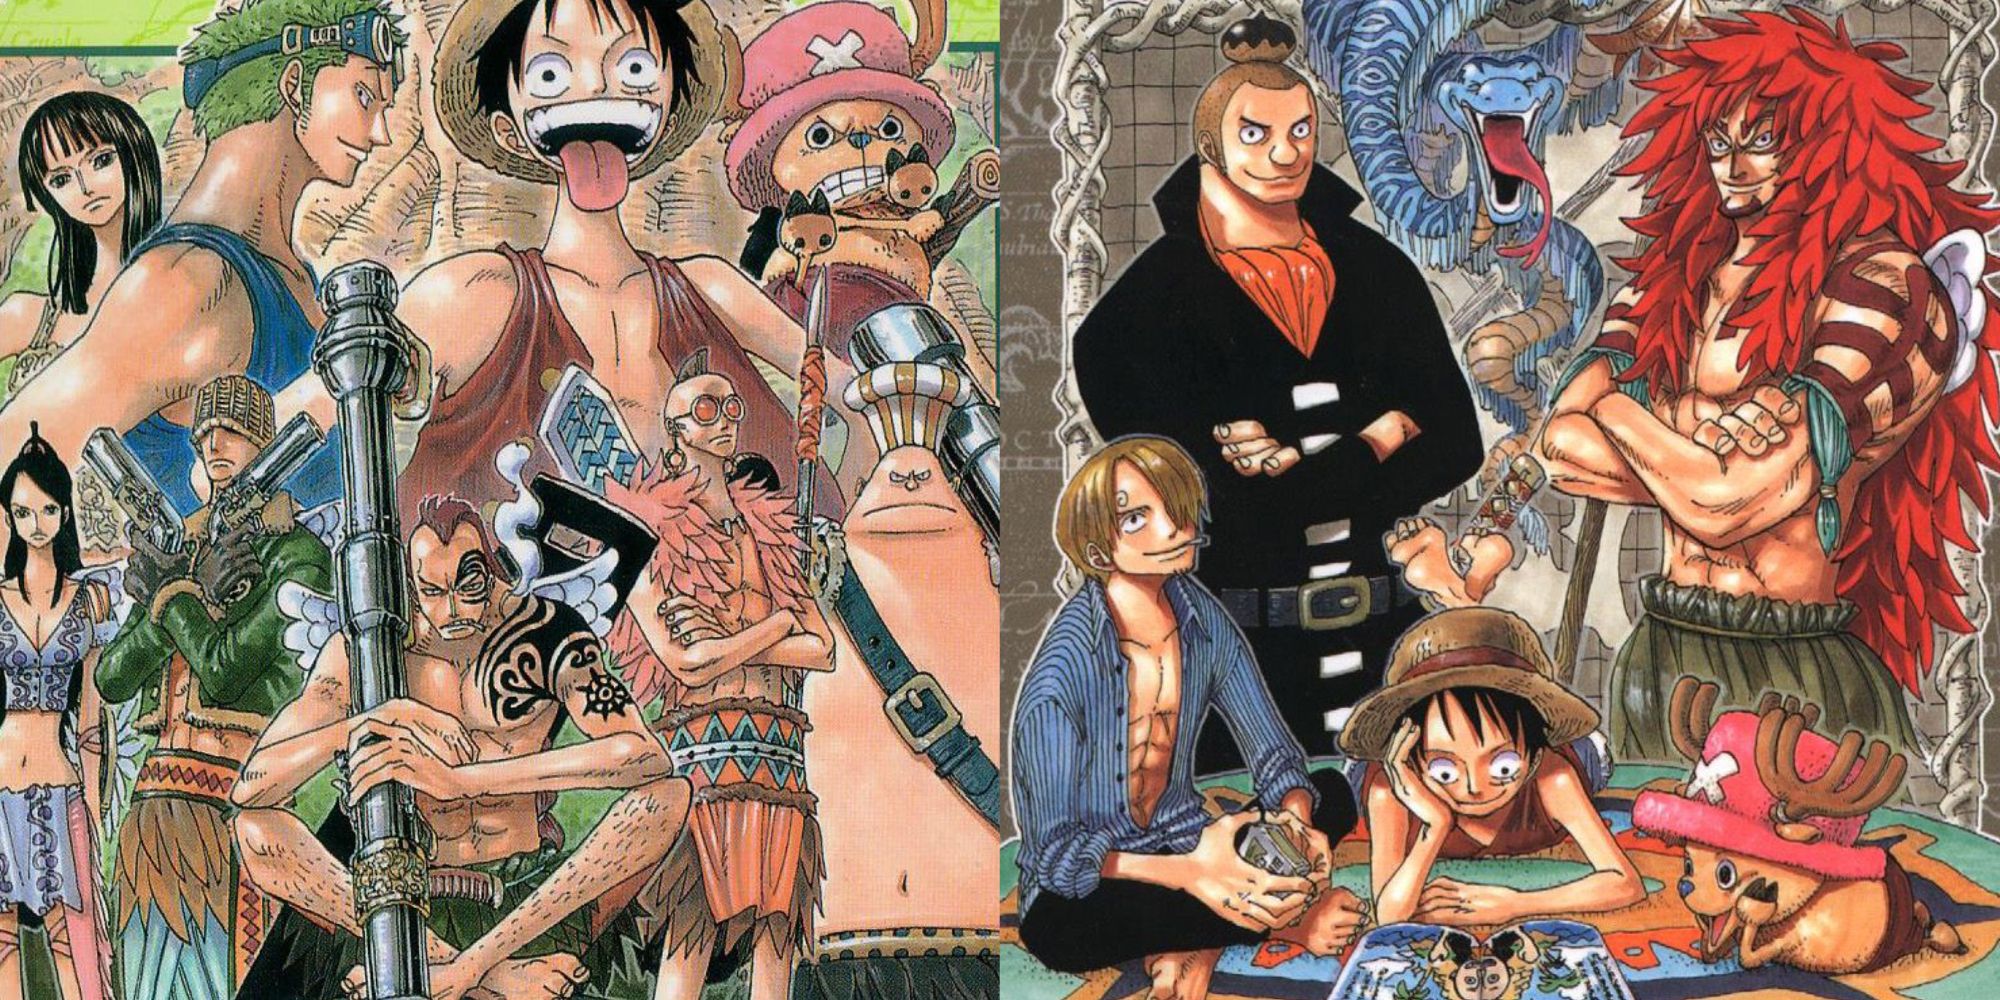 covers of one piece manga volumes of the skypeia arc including important characters